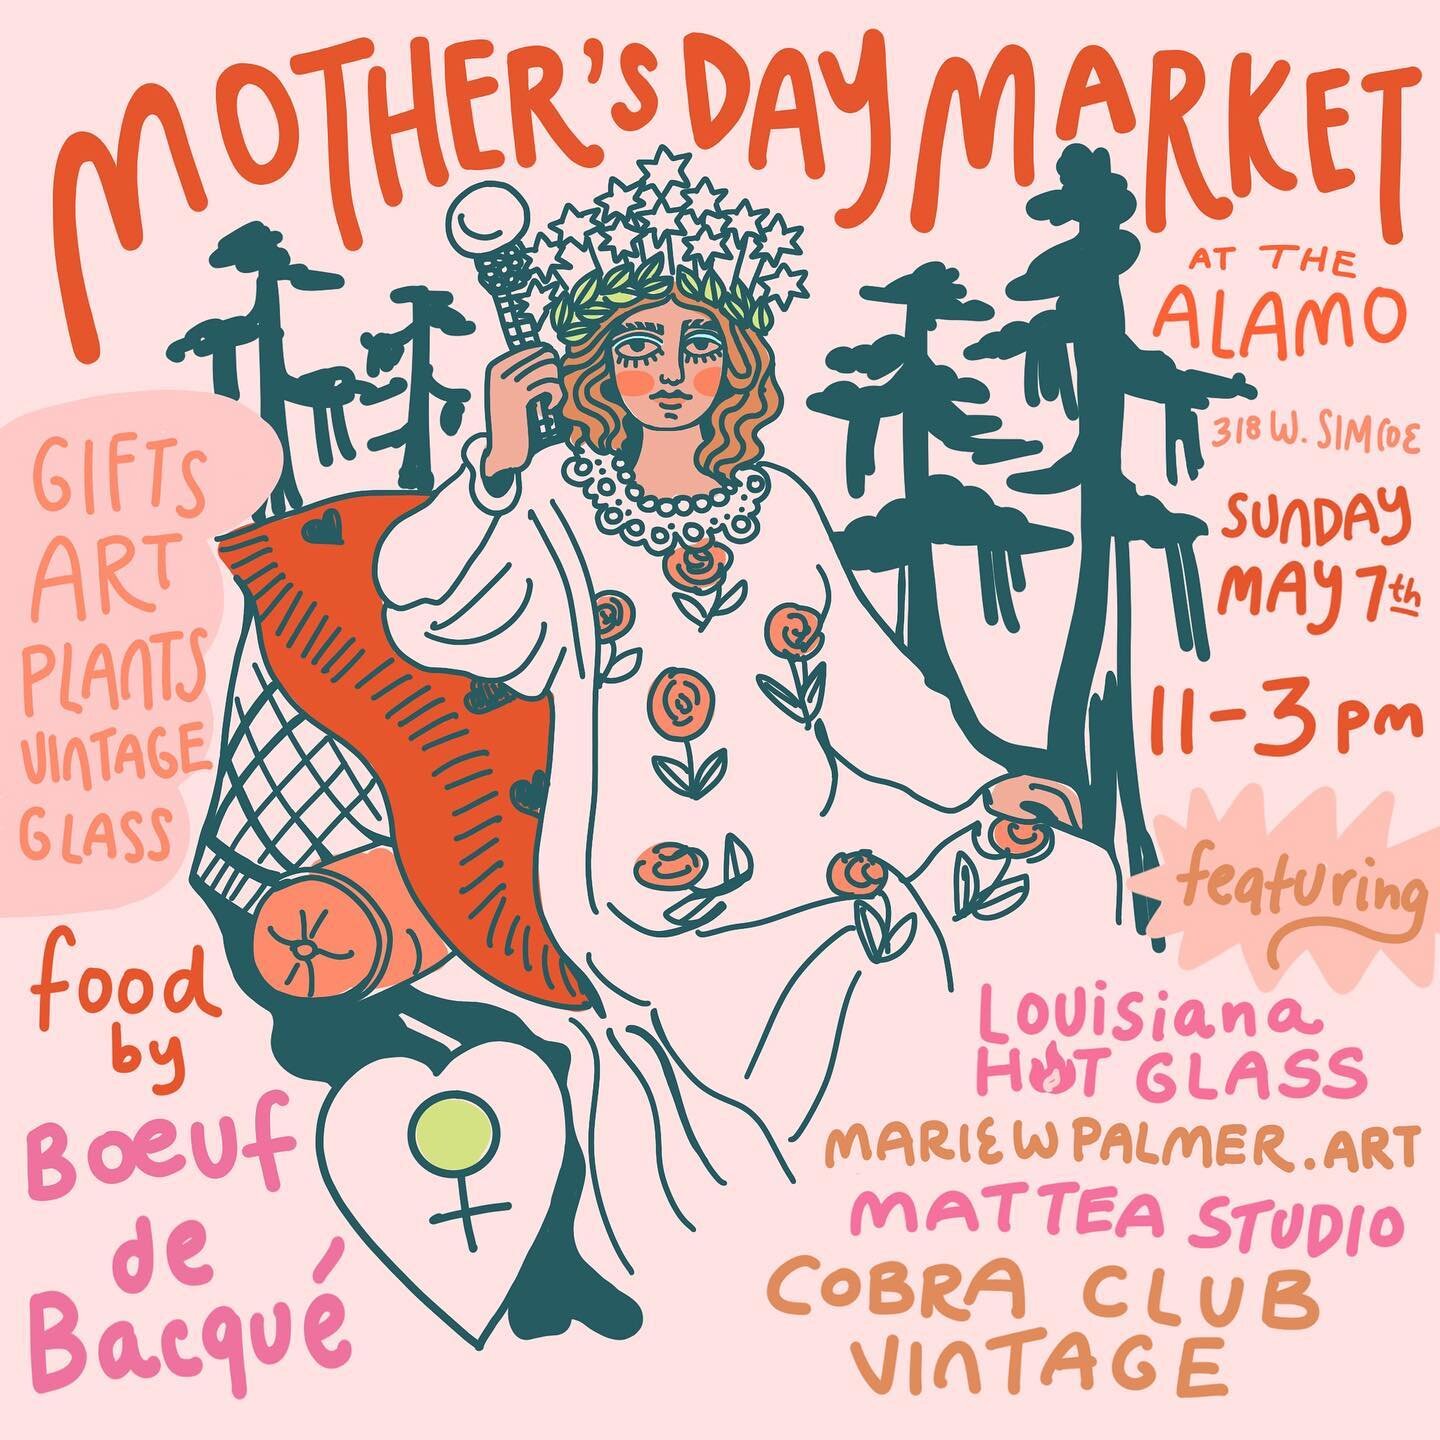 Hey y&rsquo;all! We&rsquo;re throwing a last minute Mother&rsquo;s Day Market this Sunday May 7th from 11-3 at the Alamo. Make your mom or yourself feel like an Empress with a gift from our local selection of artists:

@louisianahotglass 
@mariewpalm